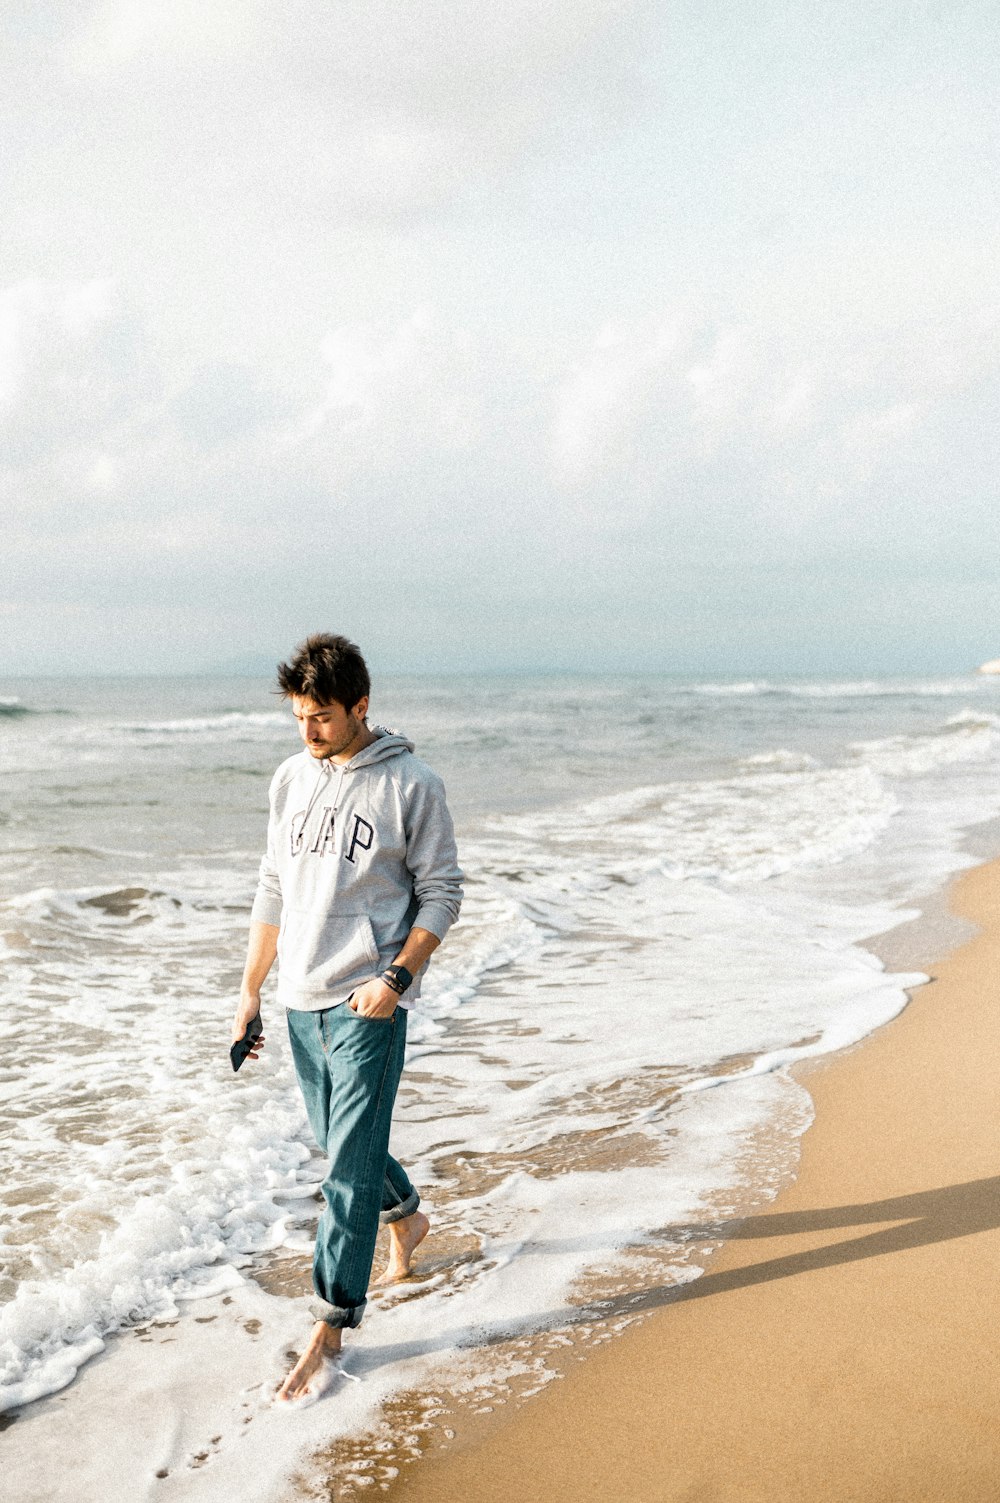 man in gray long sleeve shirt and green shorts standing on beach during daytime